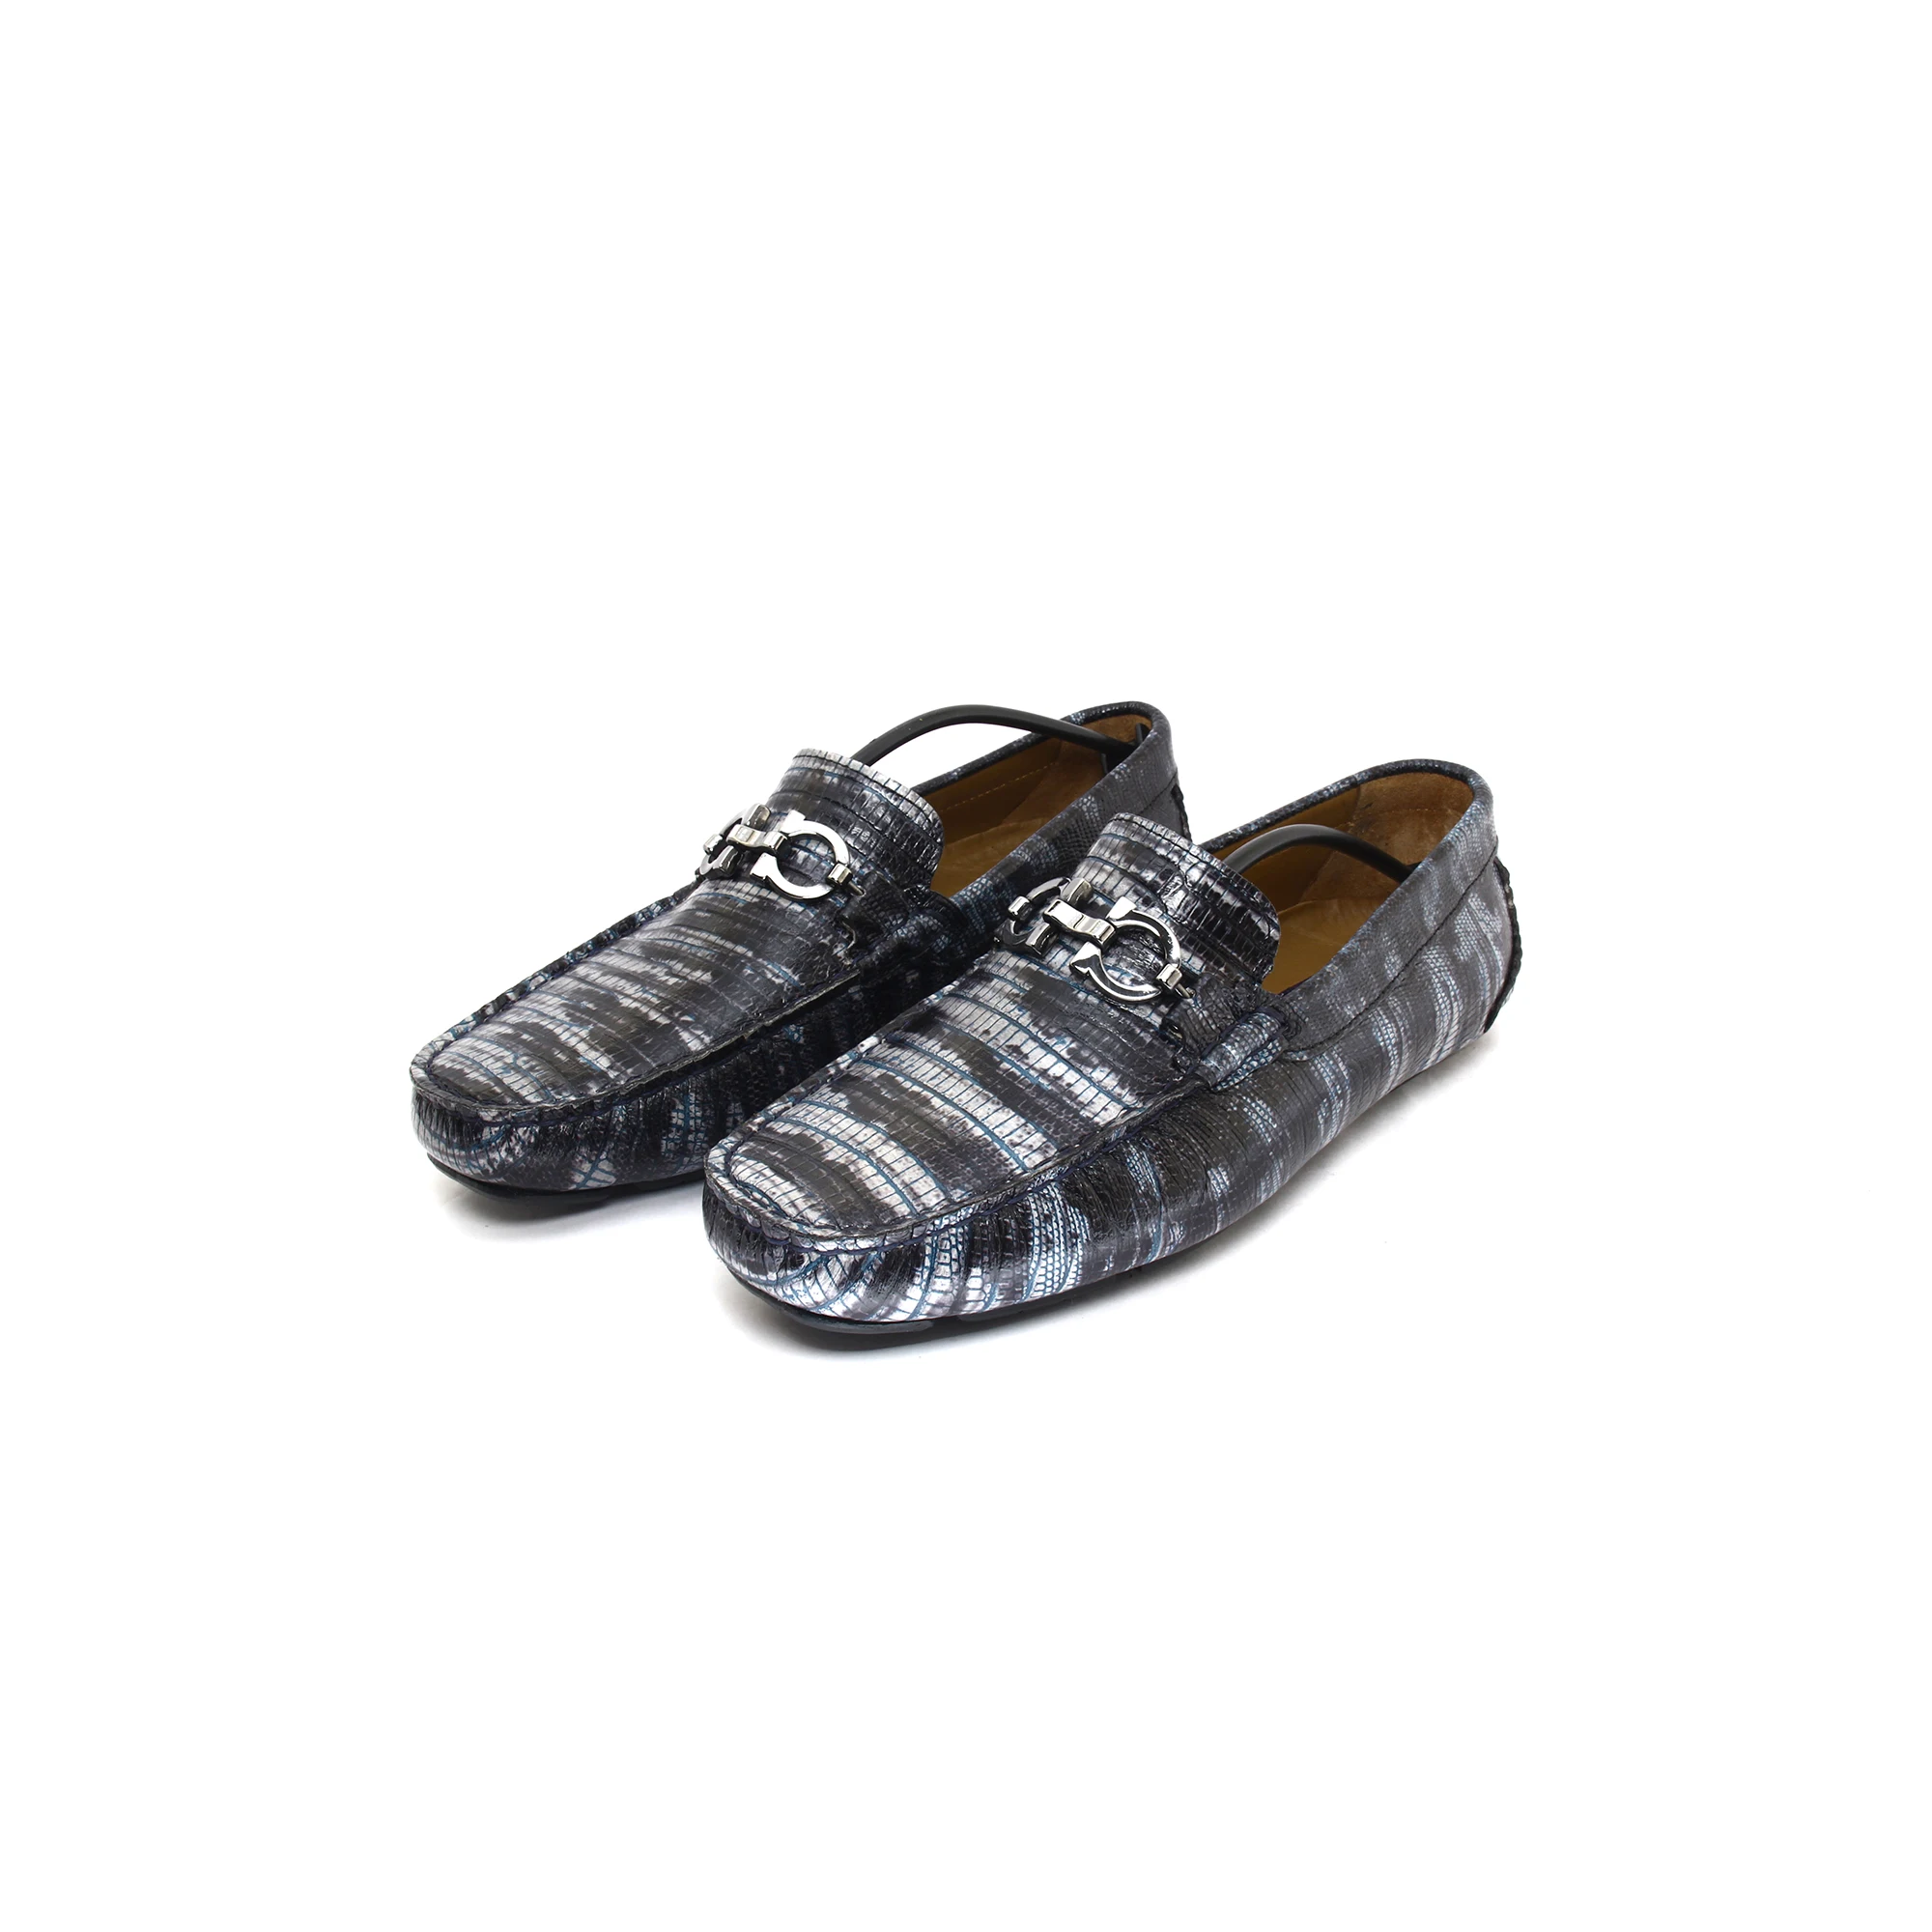 

Handmade Loafers with Forest Snake Skin Pattern, Striped Embossed Light & Dark Blue Calf Leather, Men's Artistic Fashion Style